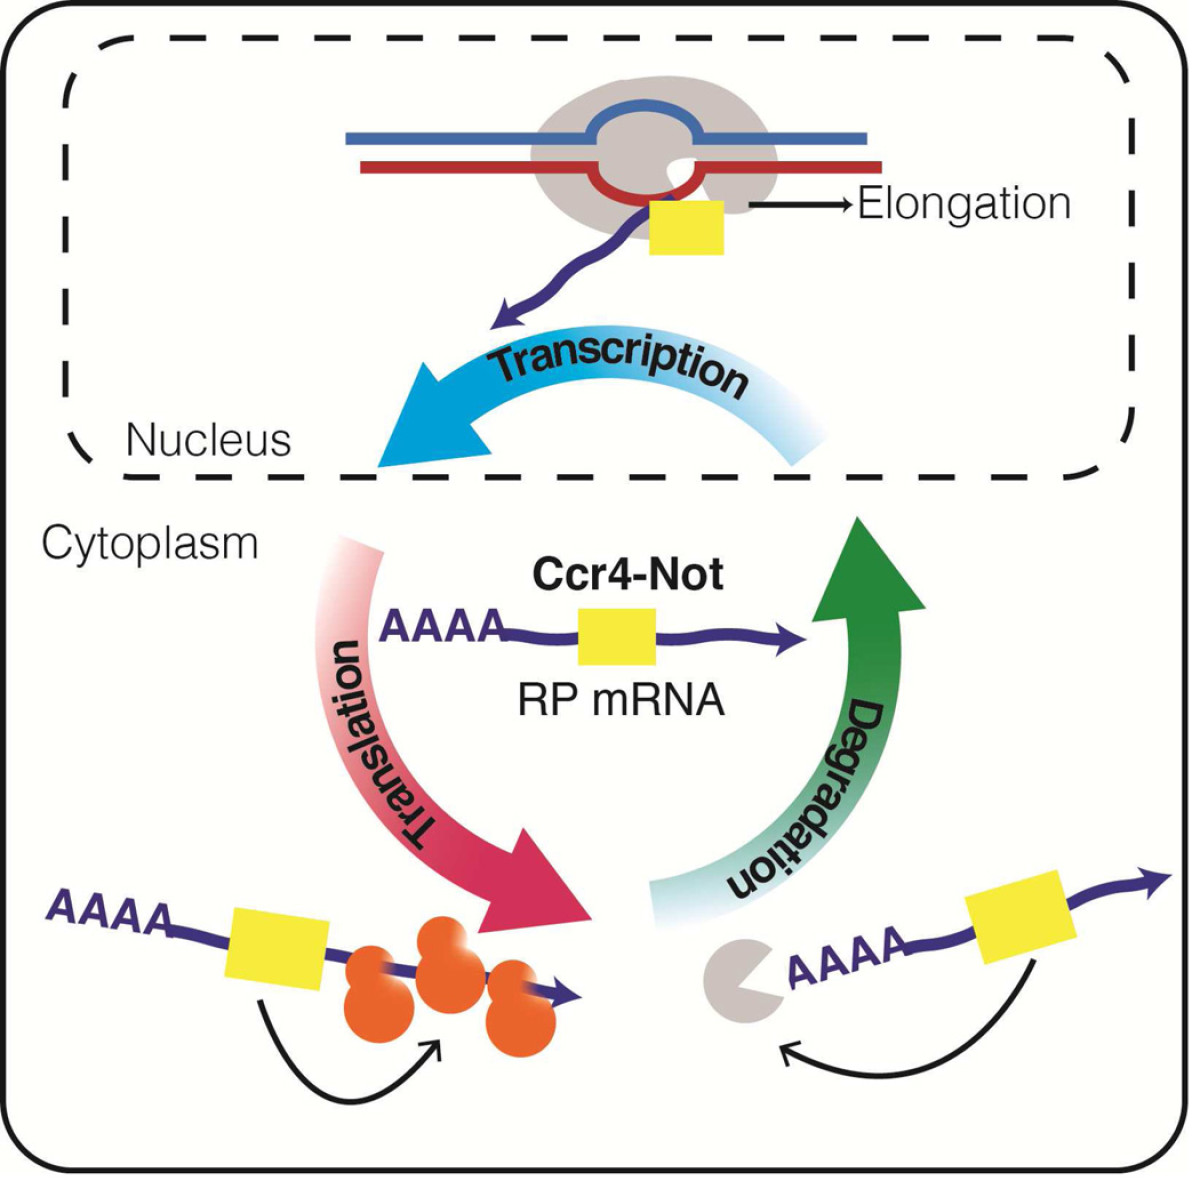 regulation-of-gene-expression-by-the-ccr4-not-complex